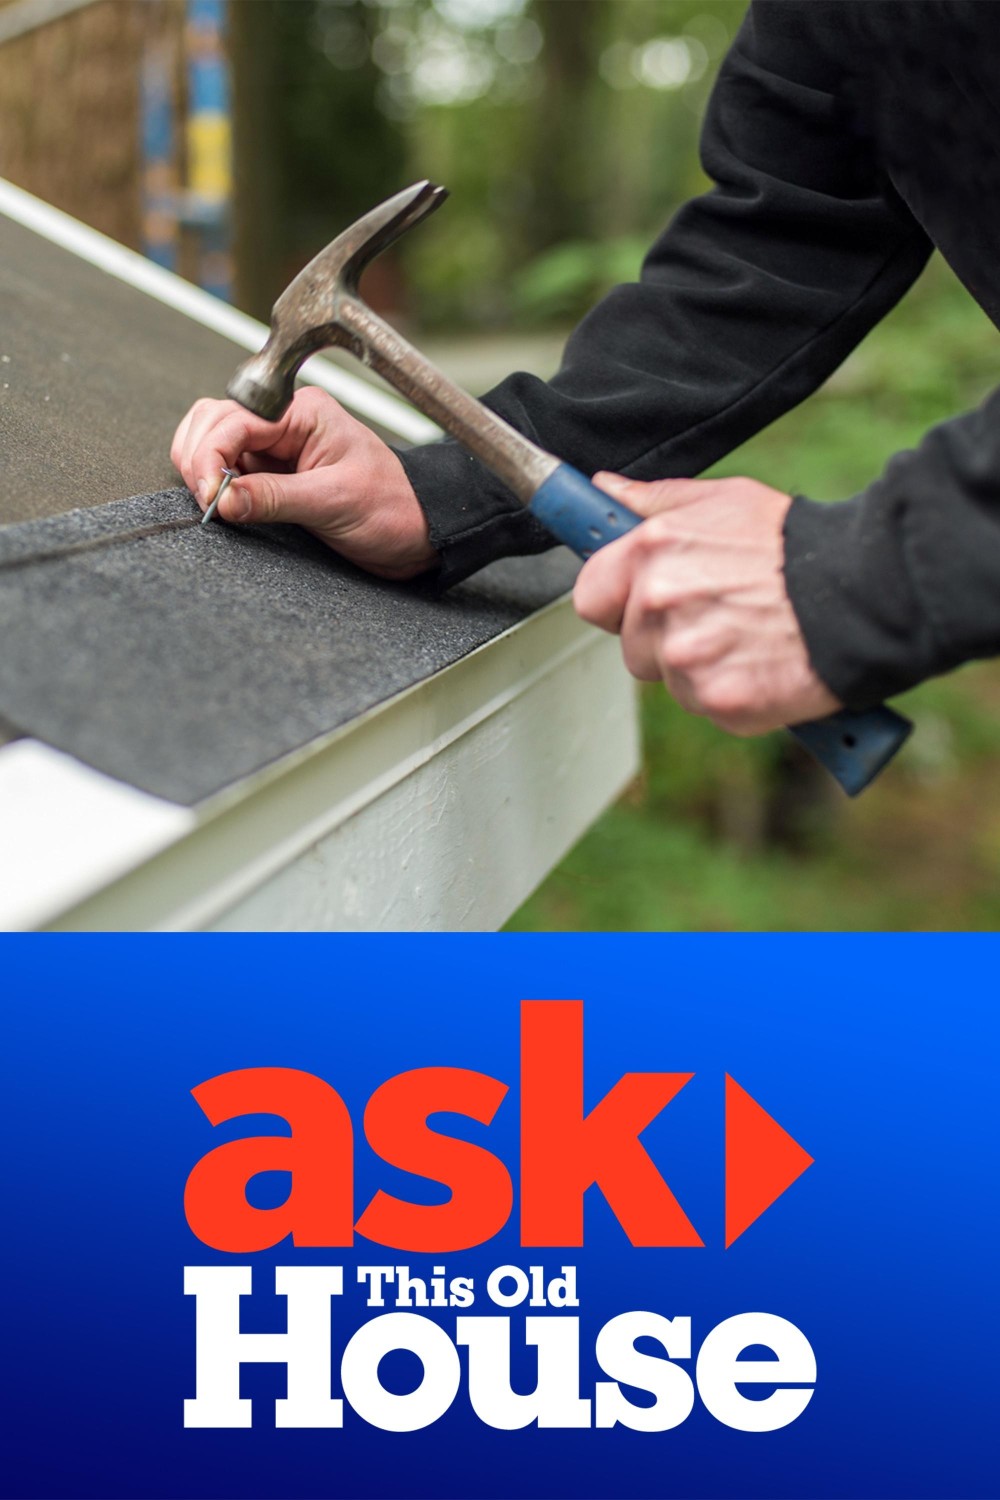 Ask This Old House S22E11 [1080p] (x265) 8b4f167799fd1925fdcaafe1c46a9942